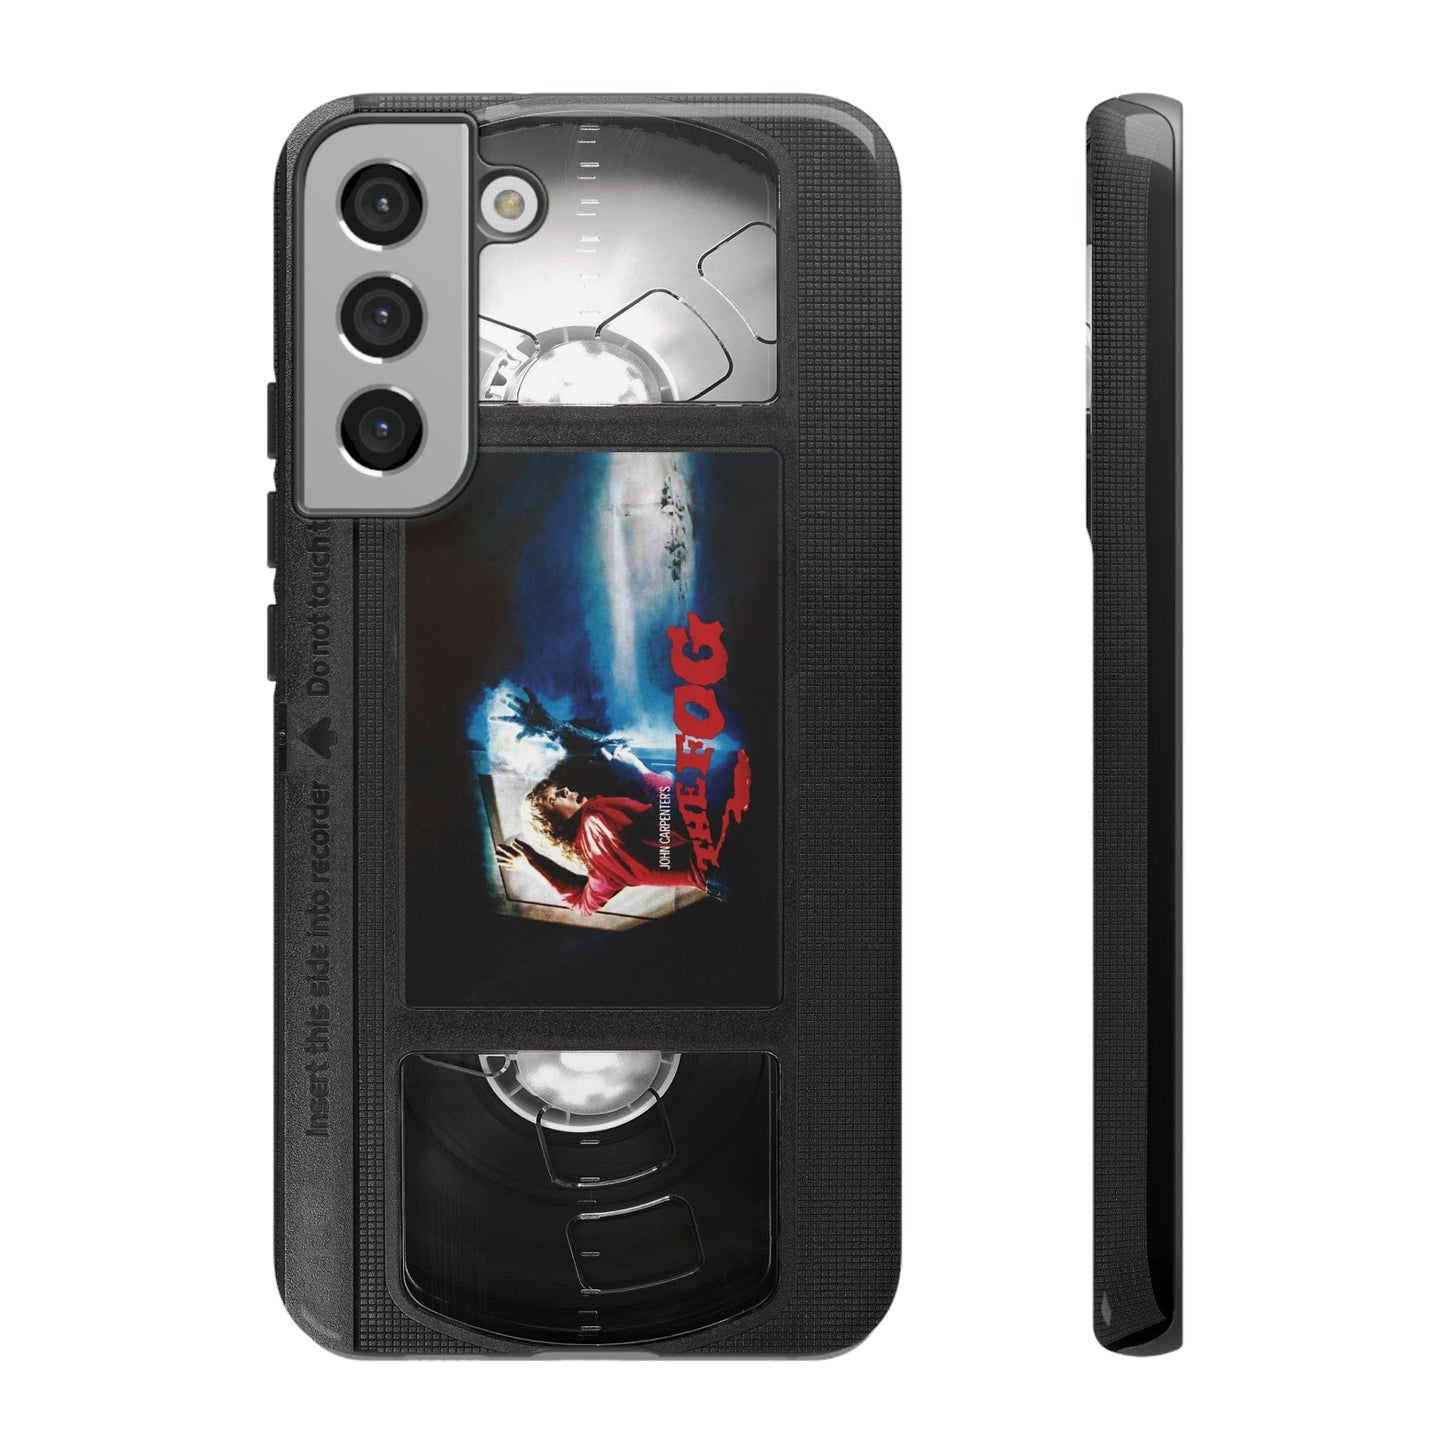 The Fog Impact Resistant VHS Phone Case